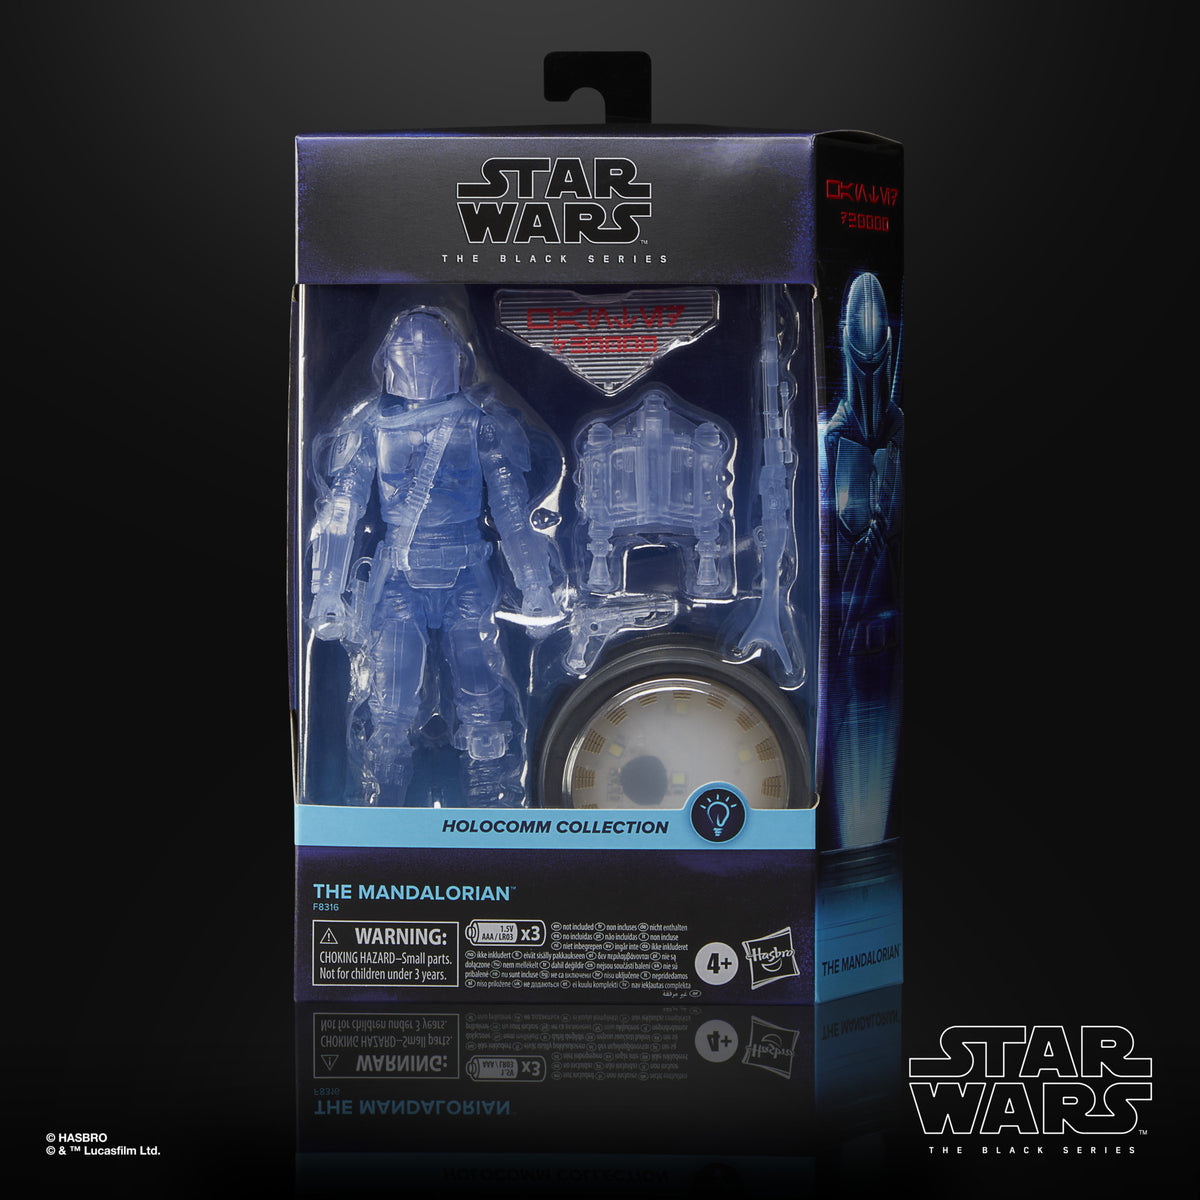 Hasbro - Star Wars: The Black Series - Holocomm Collection - The Mandalorian - Marvelous Toys